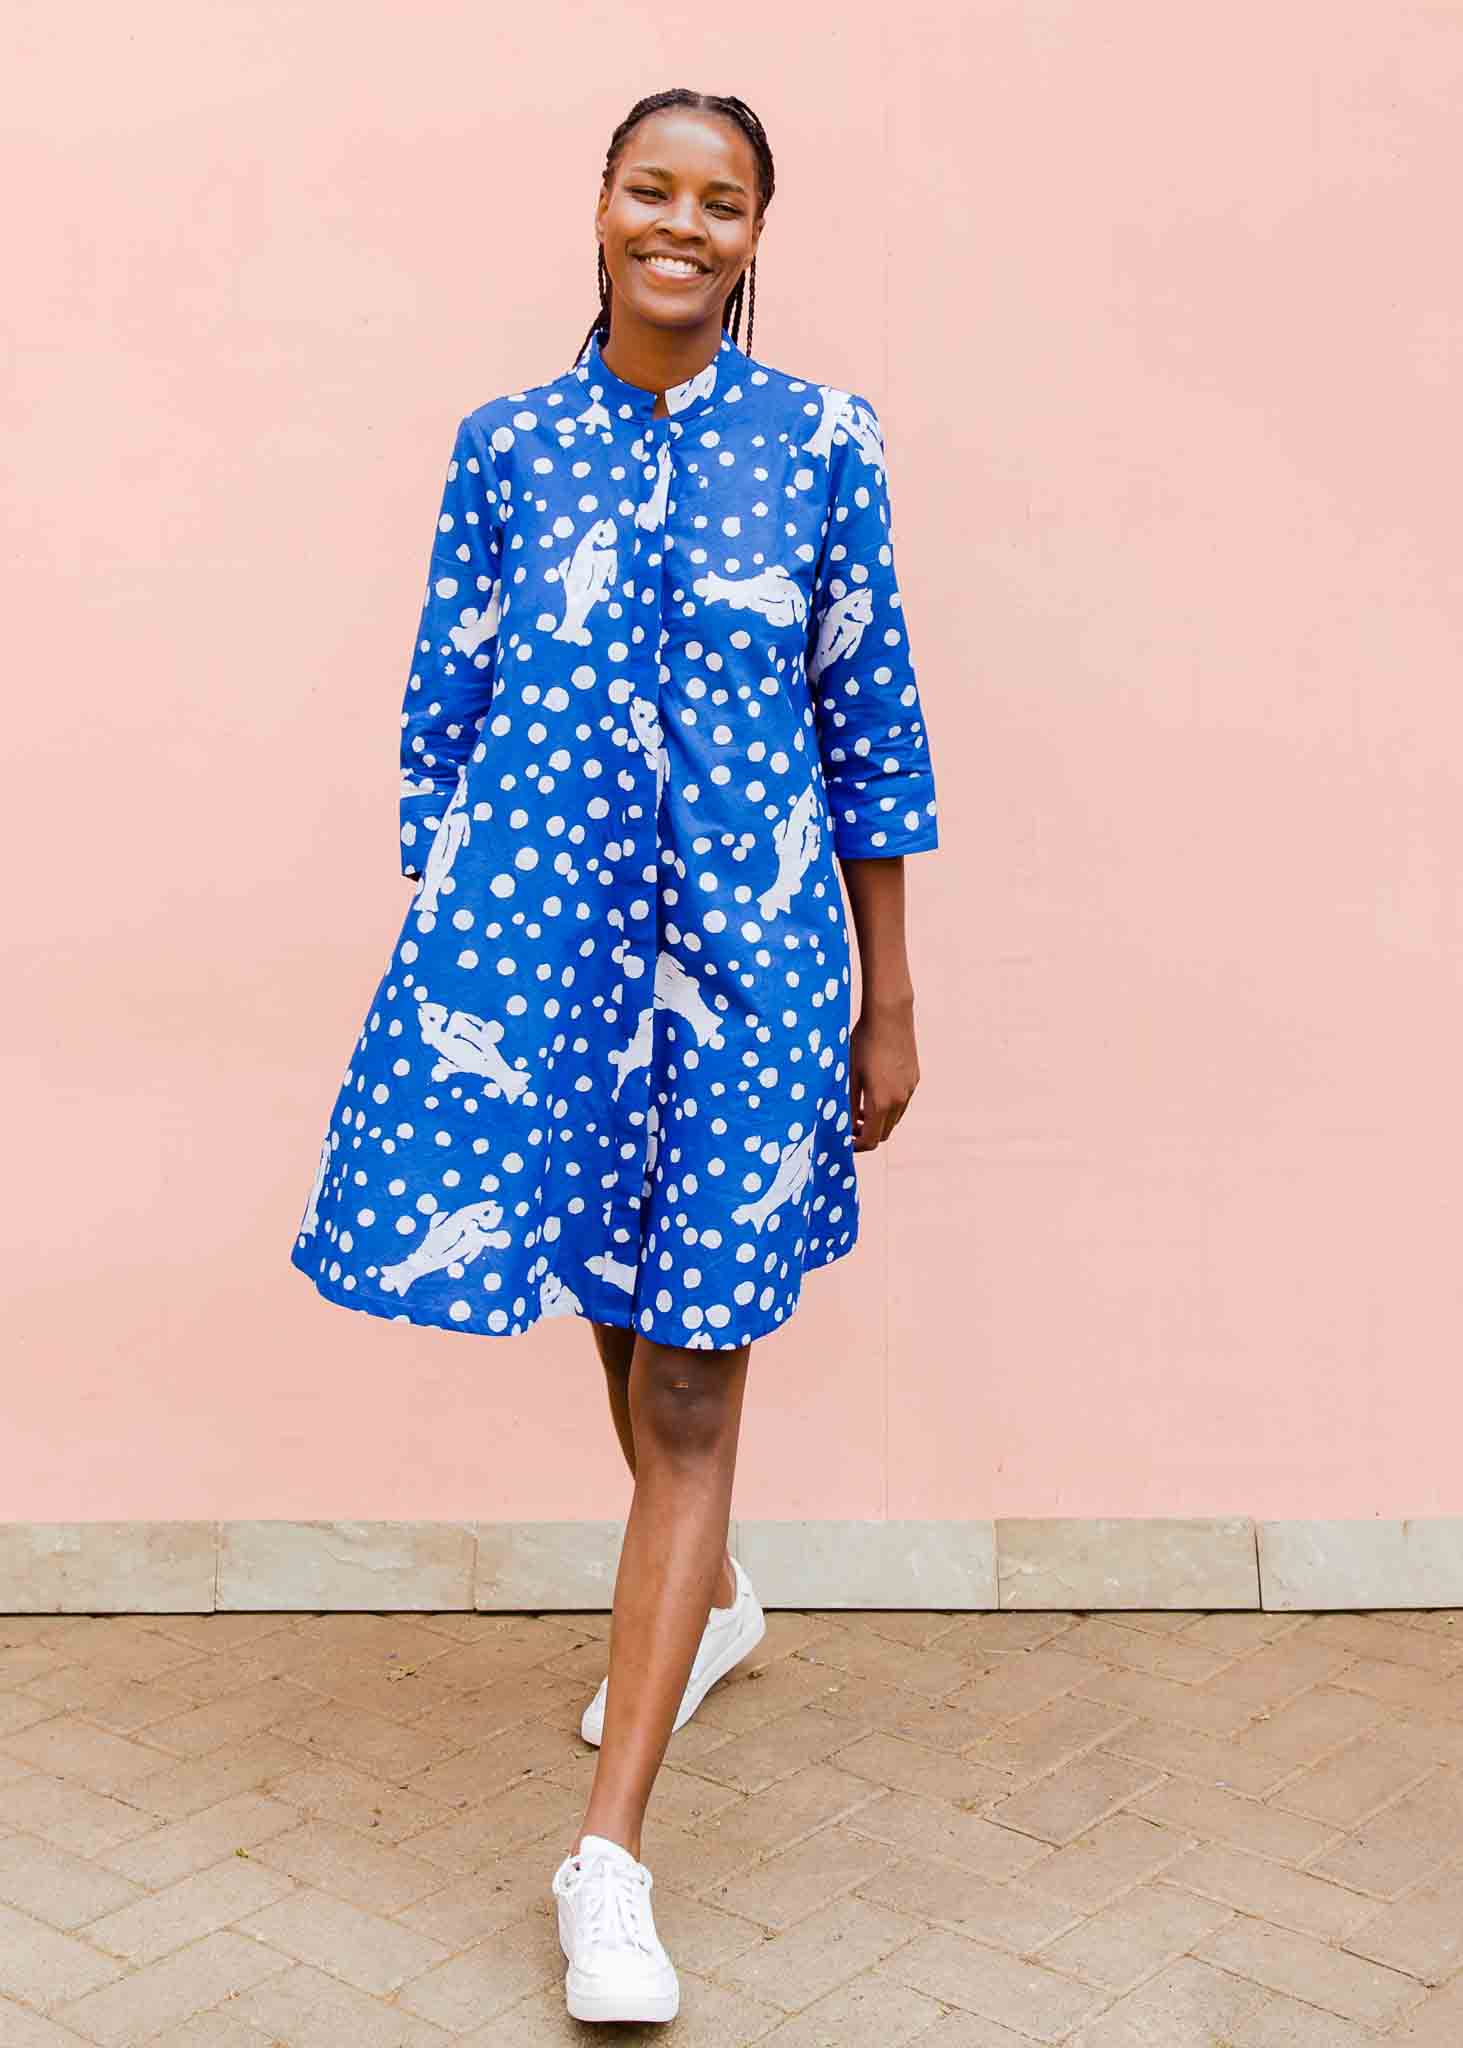 Model wearing blue dress with white fishes and polka dots.